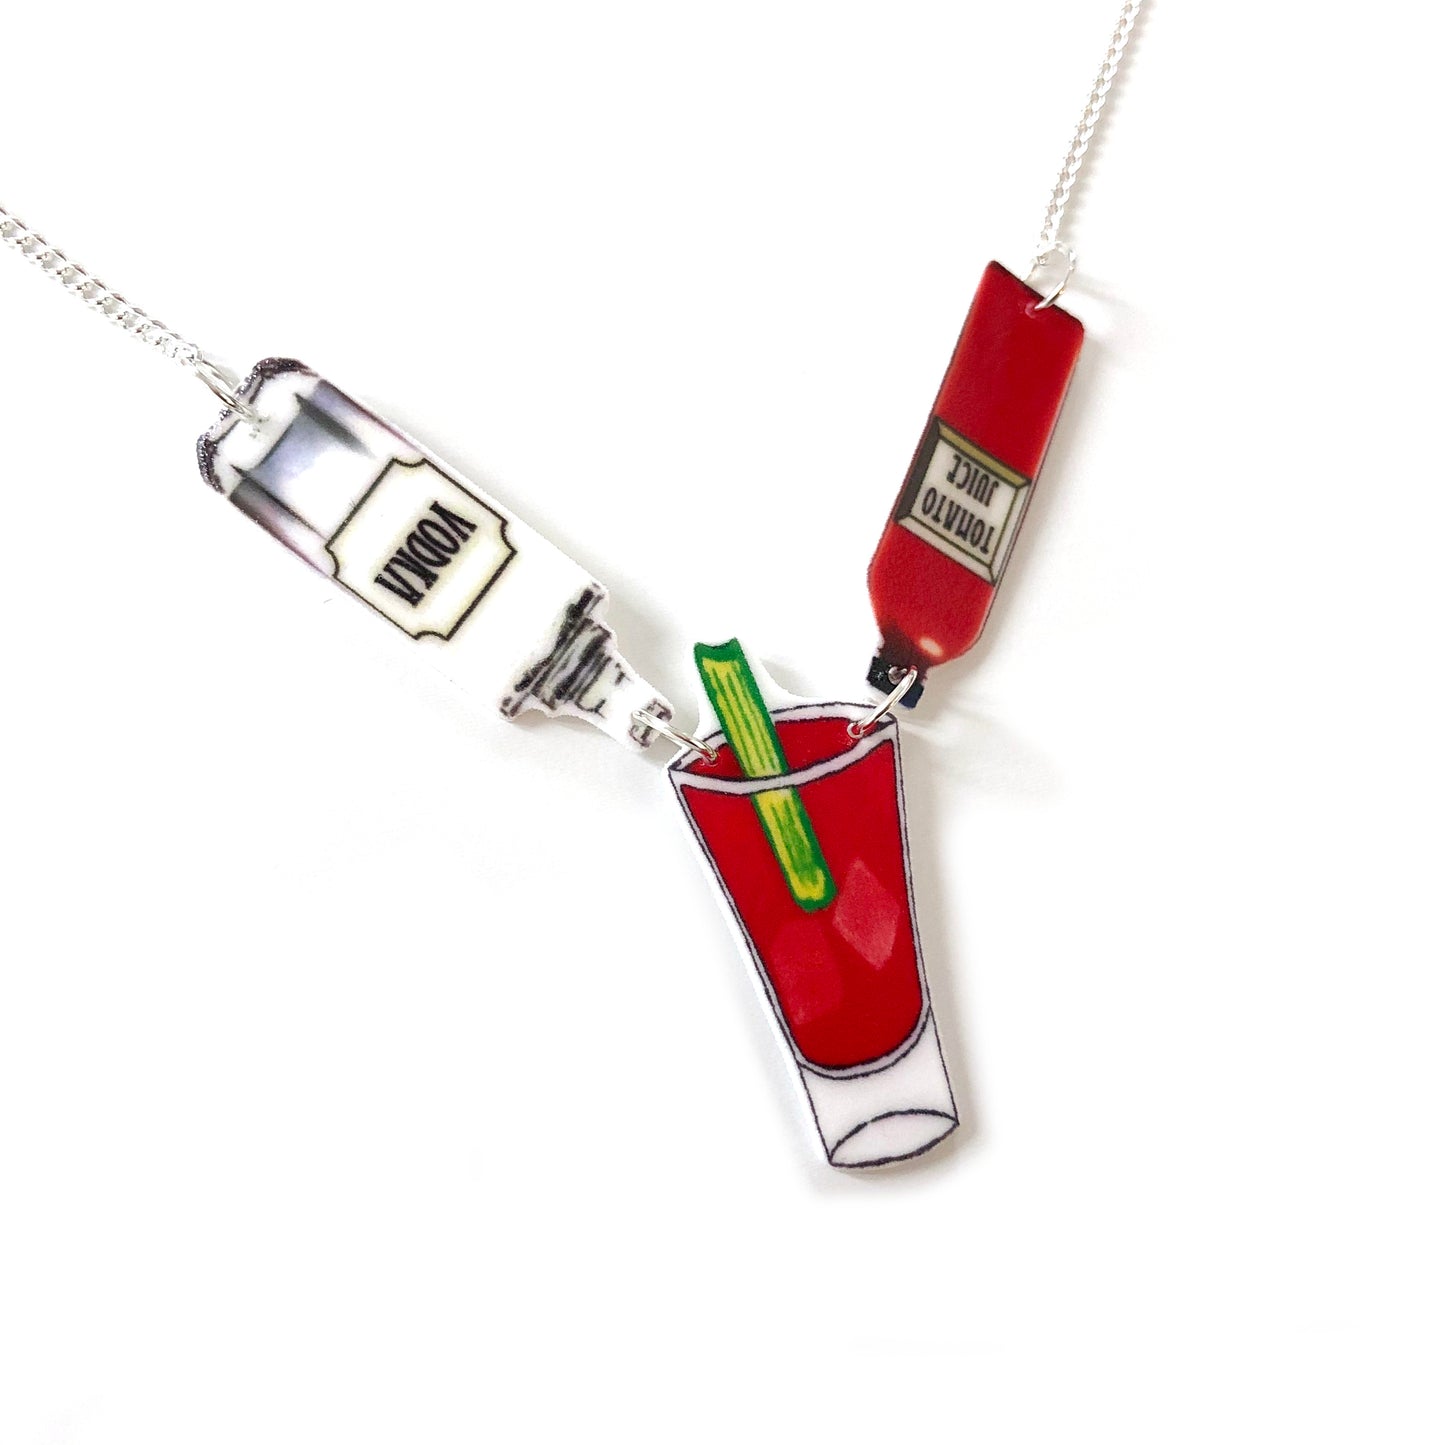 Bloody Mary cocktail statement necklace